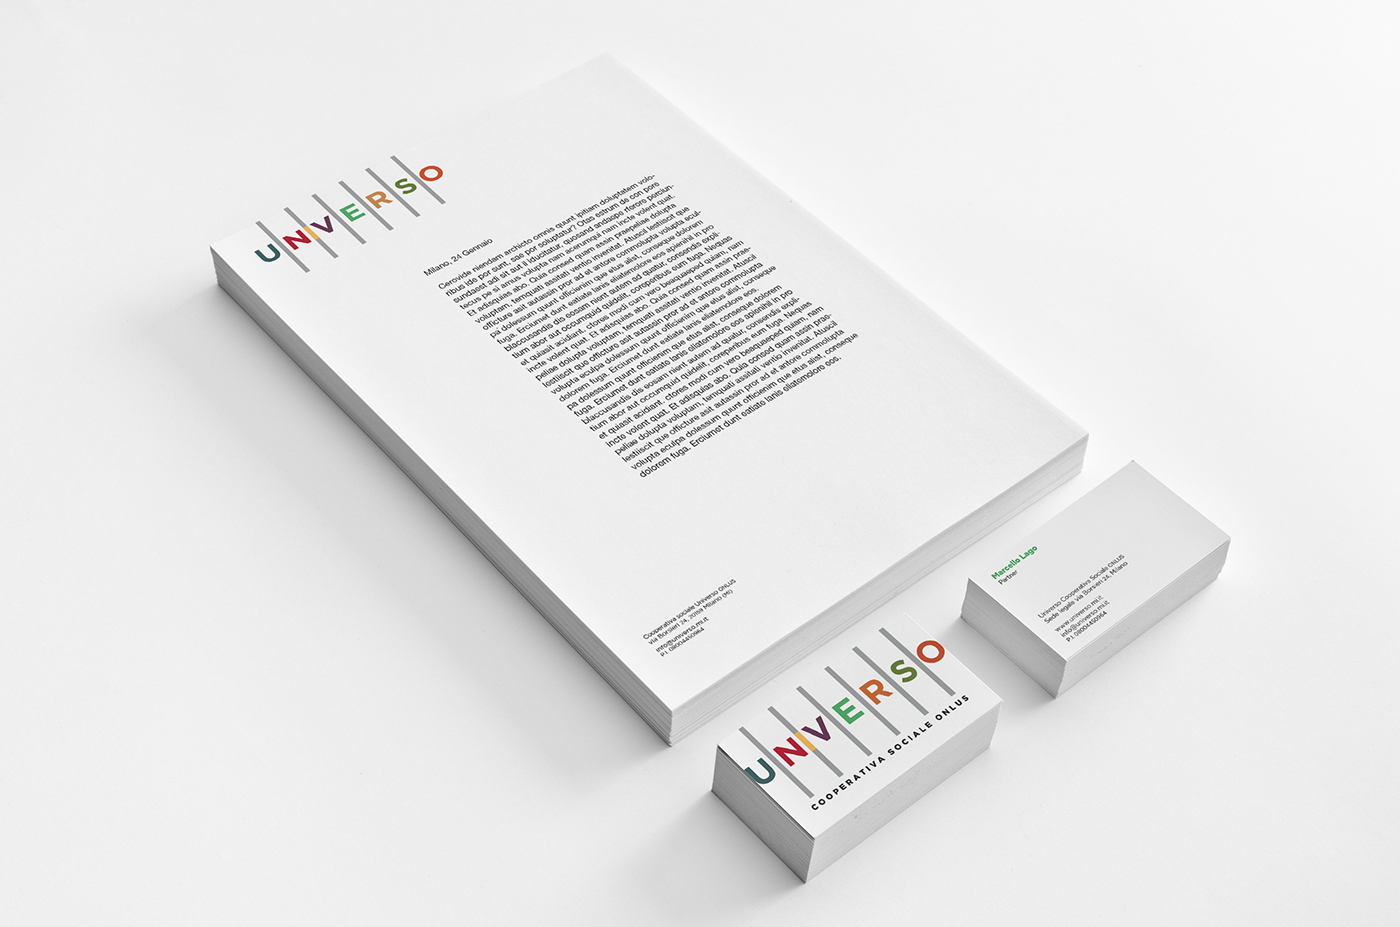 corporate id Jail held inmate colors bars business card Italy milan Bollate cisco academy identity graphic modern